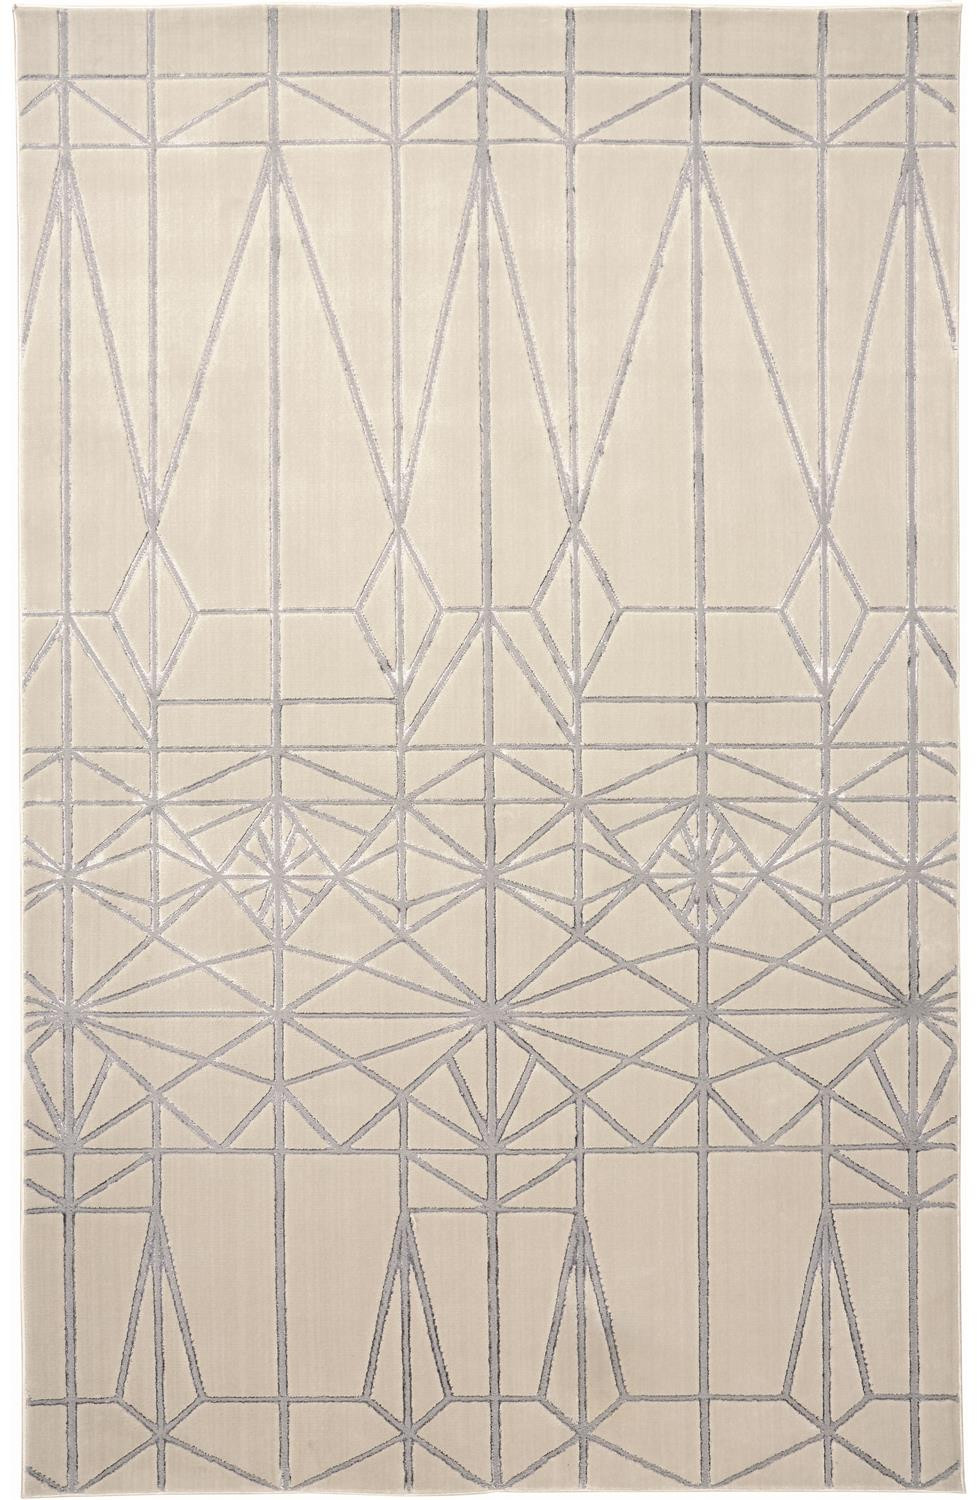 7' X 10' White Silver And Gray Geometric Stain Resistant Area Rug-511477-1